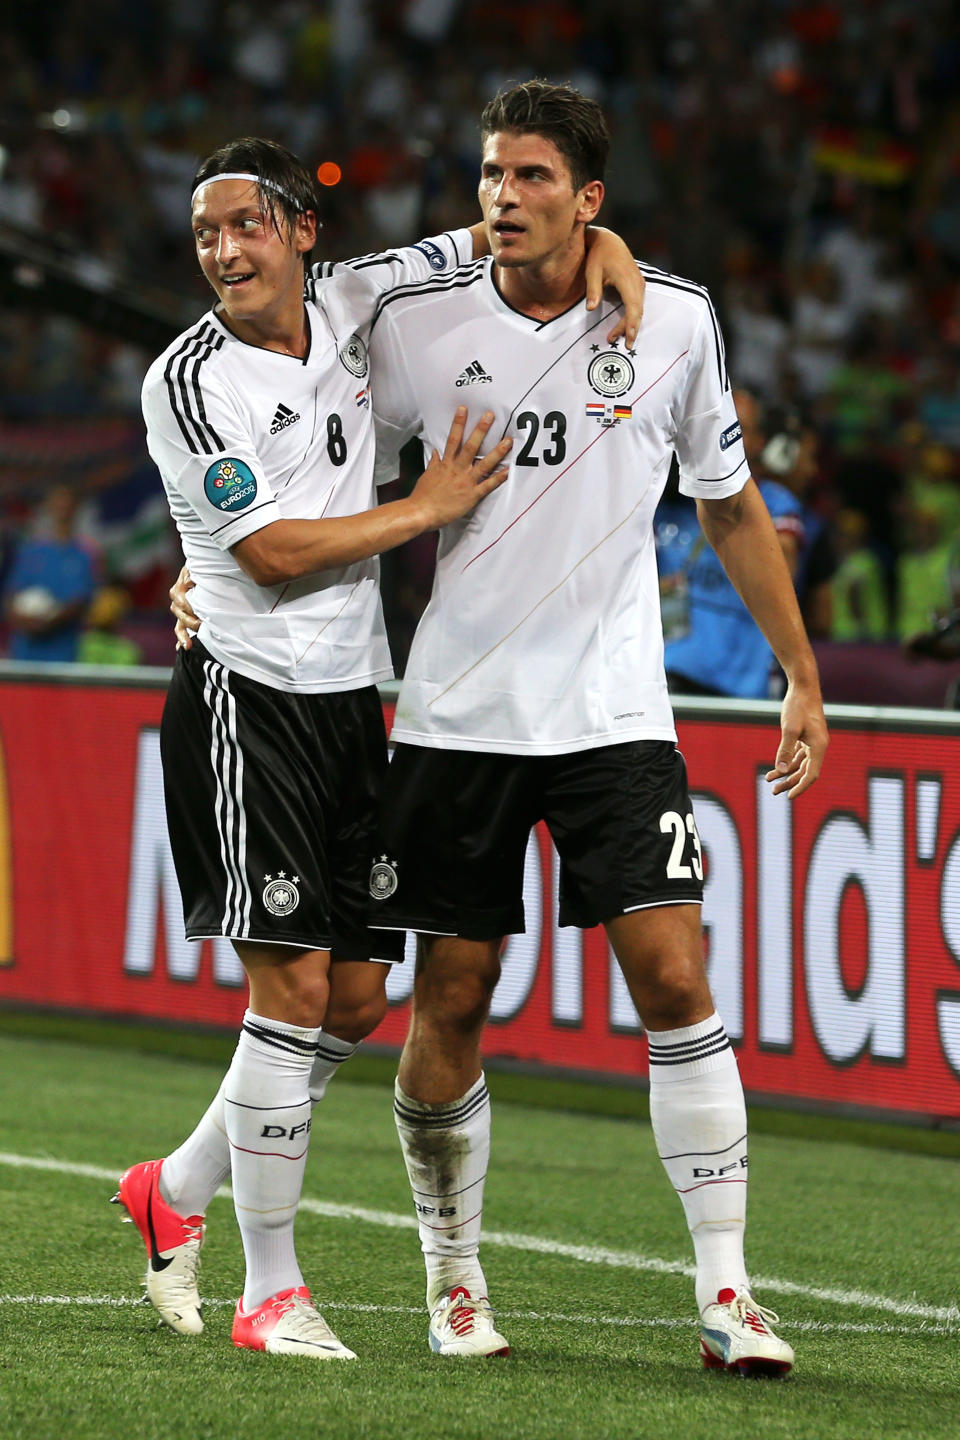 KHARKOV, UKRAINE - JUNE 13: Mario Gomez of Germany celebrates scoring their second goal with Mesut Ozil of Germany during the UEFA EURO 2012 group B match between Netherlands and Germany at Metalist Stadium on June 13, 2012 in Kharkov, Ukraine. (Photo by Ian Walton/Getty Images)